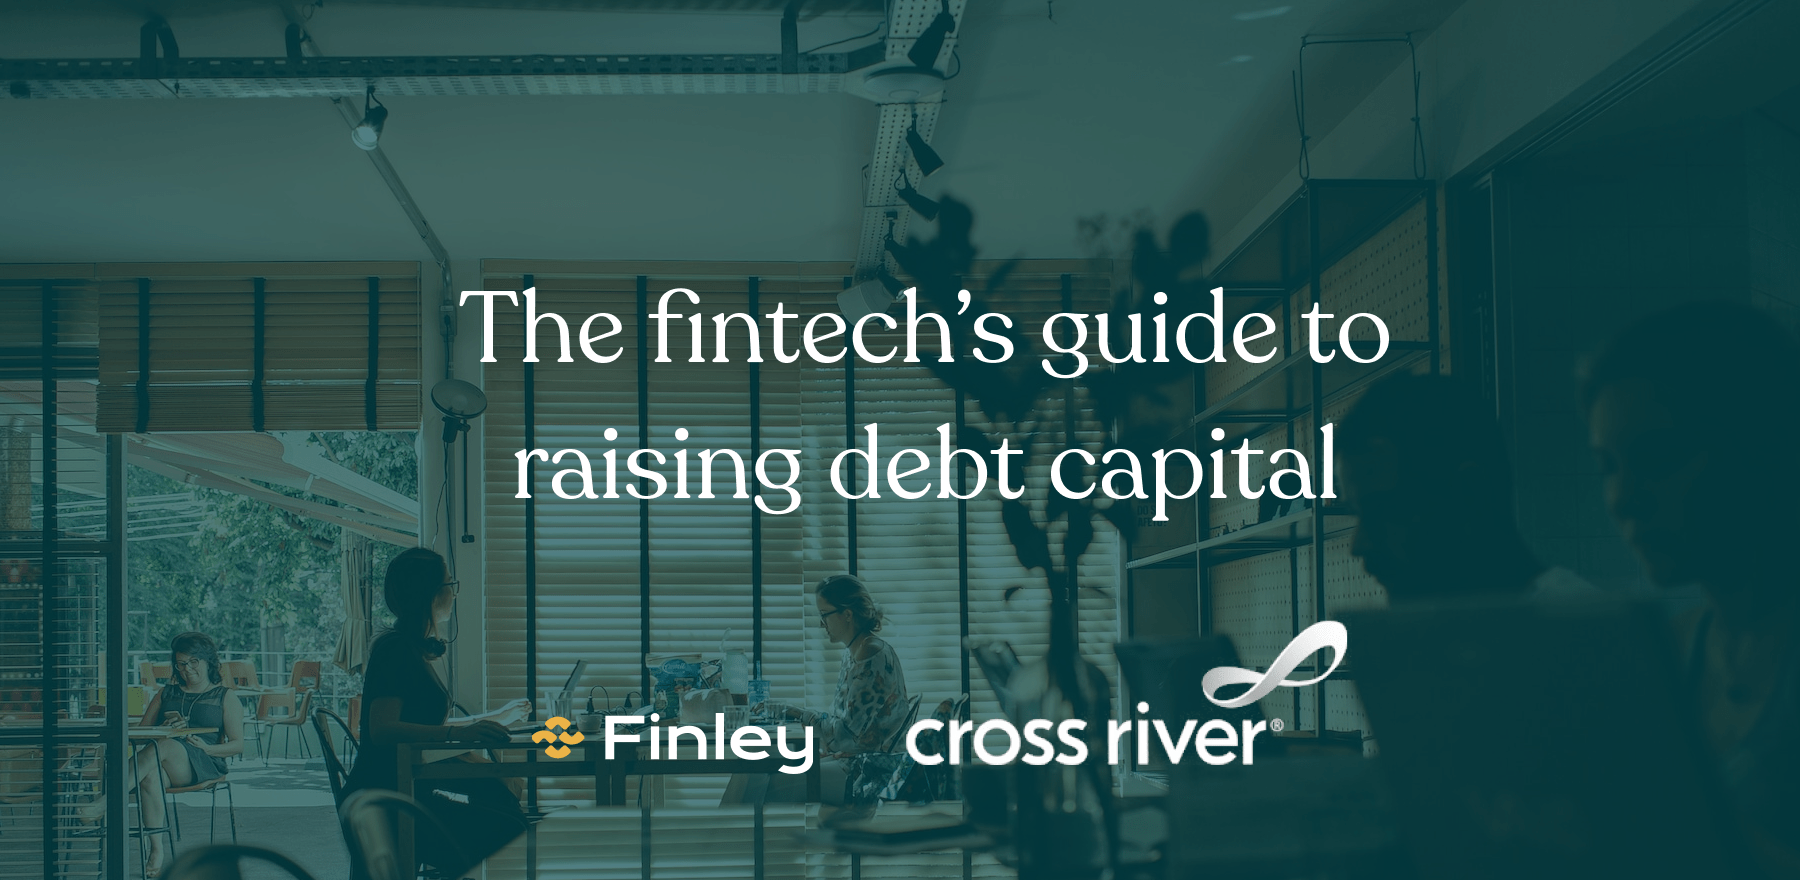 Finley and Cross River Bank release 'The fintech's guide to raising debt capital' - Featured image